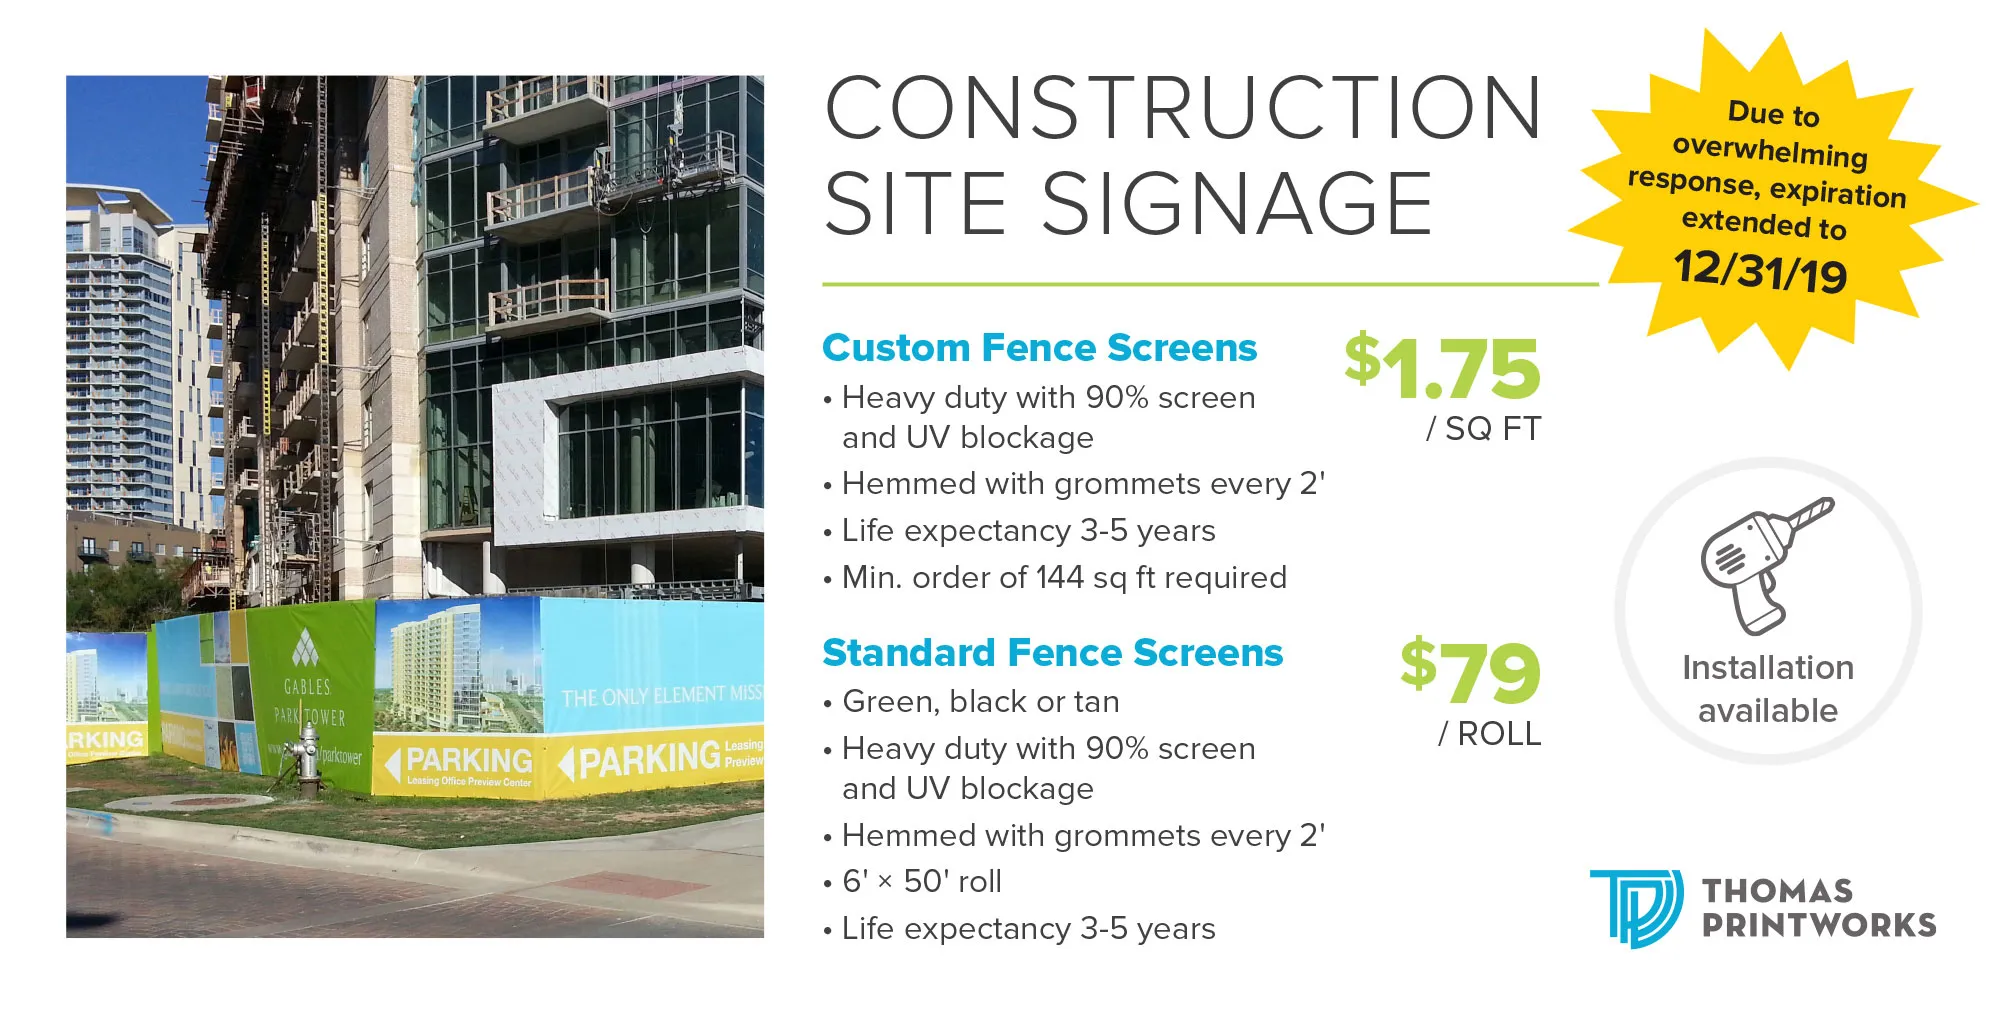 Construction site signage offer